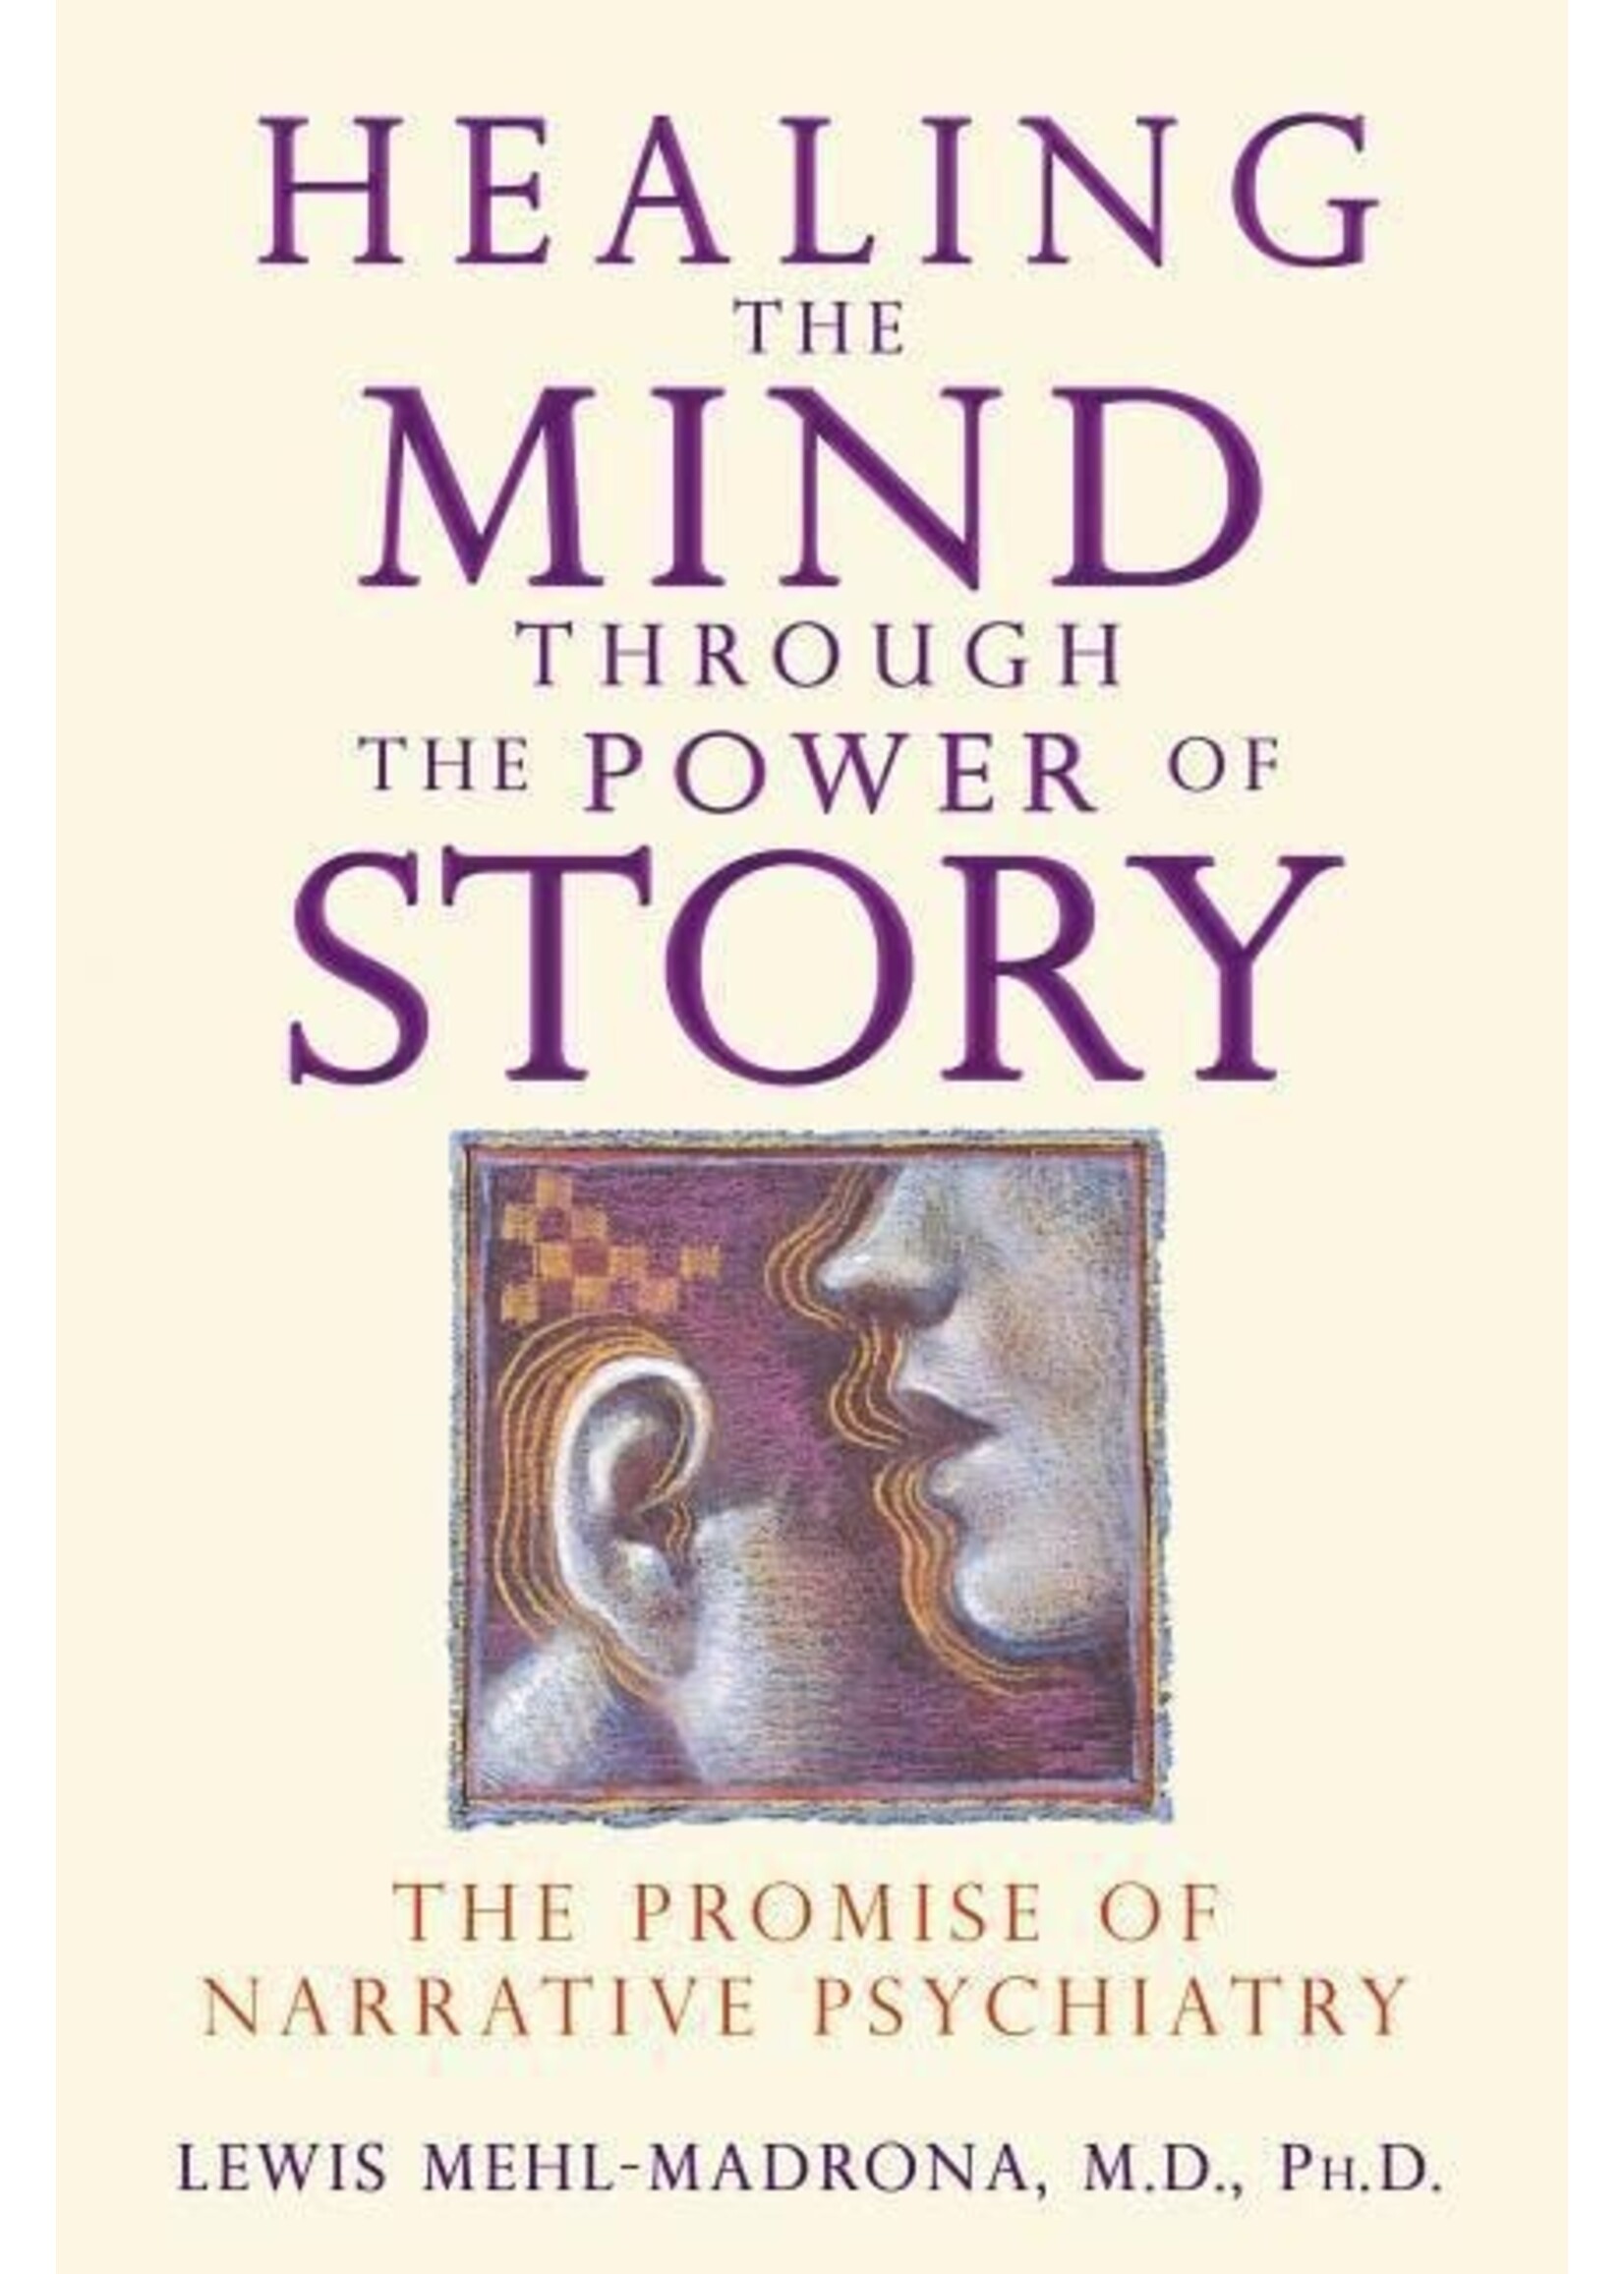 Healing the Mind Through the Power of Story